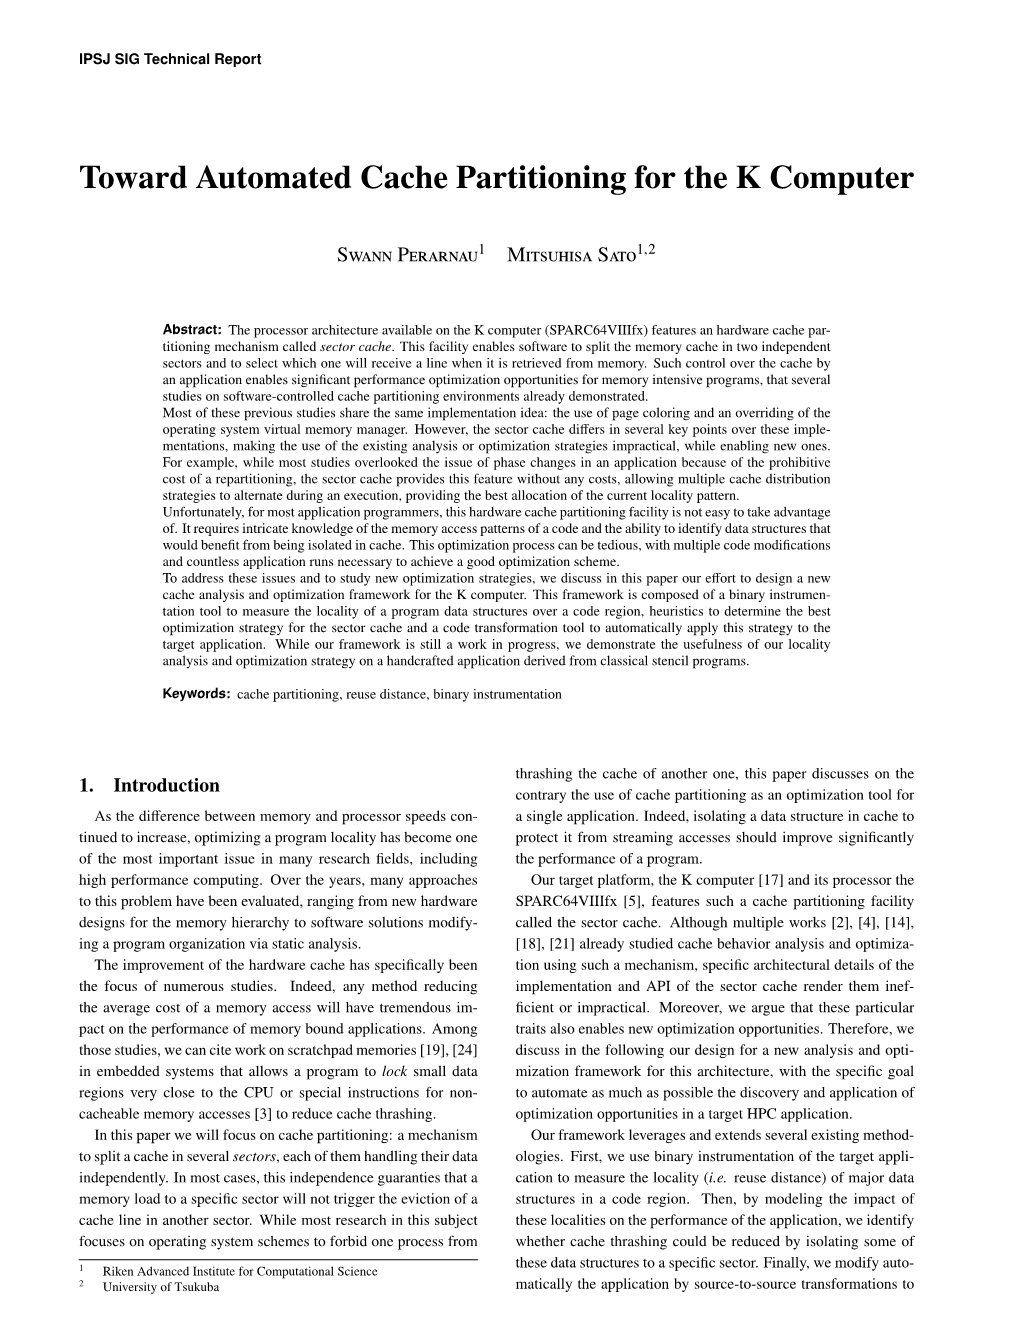 Toward Automated Cache Partitioning for the K Computer